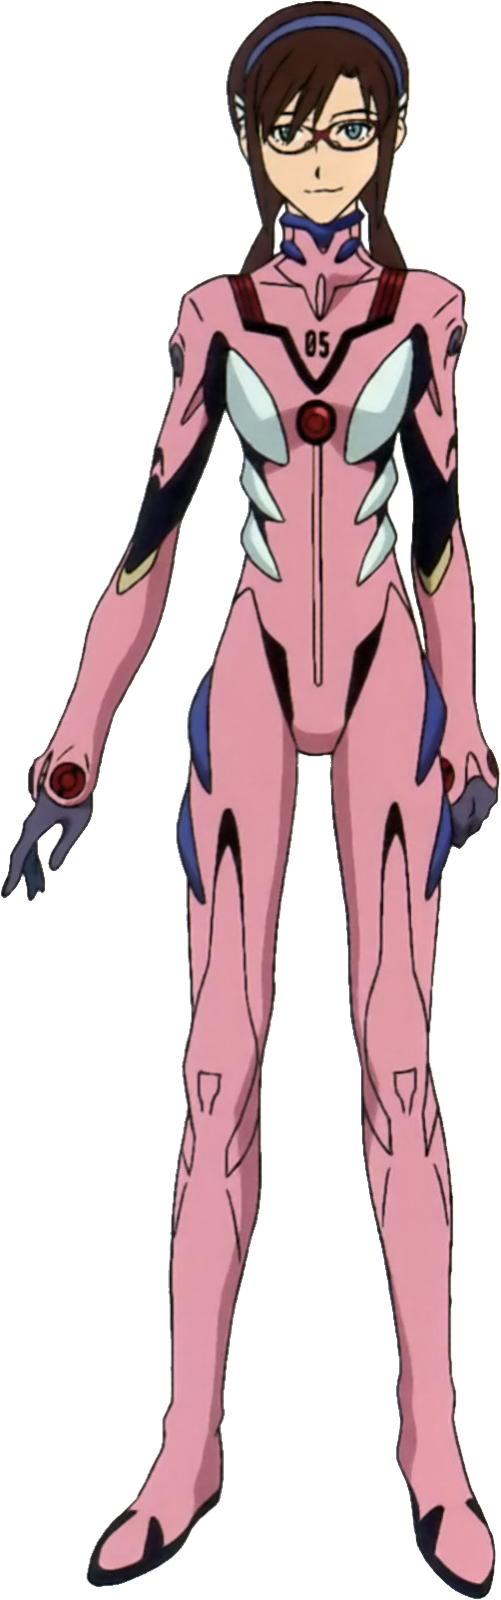 A Cartoon Of A Woman In A Pink Body Suit